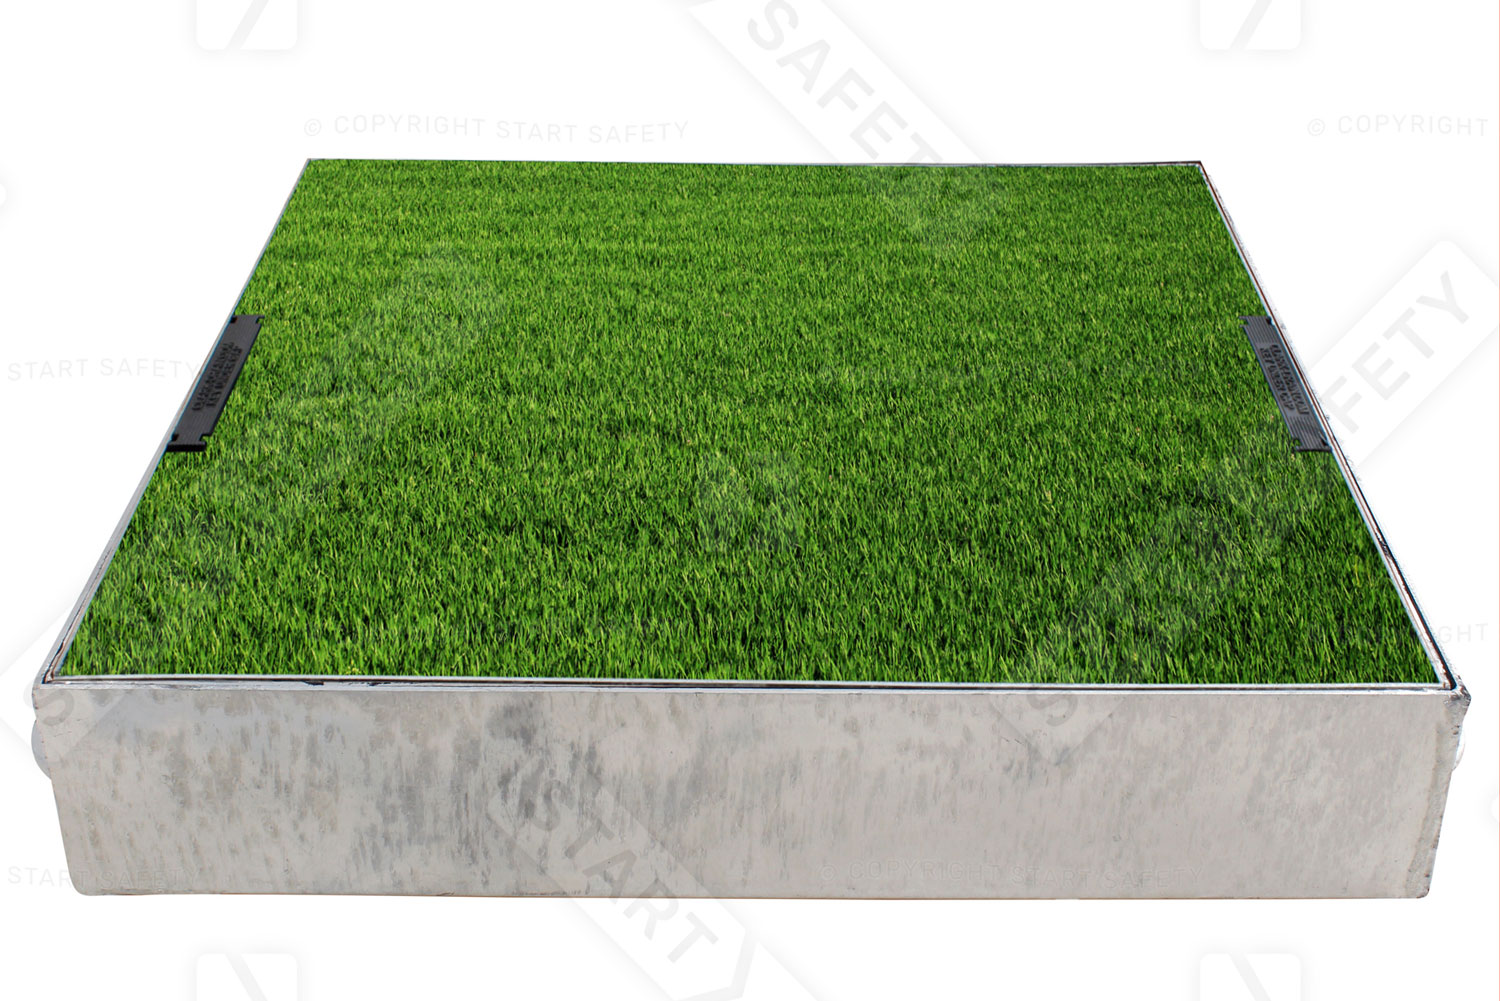 EcoGrid Grass and Gravel Cover Membrane